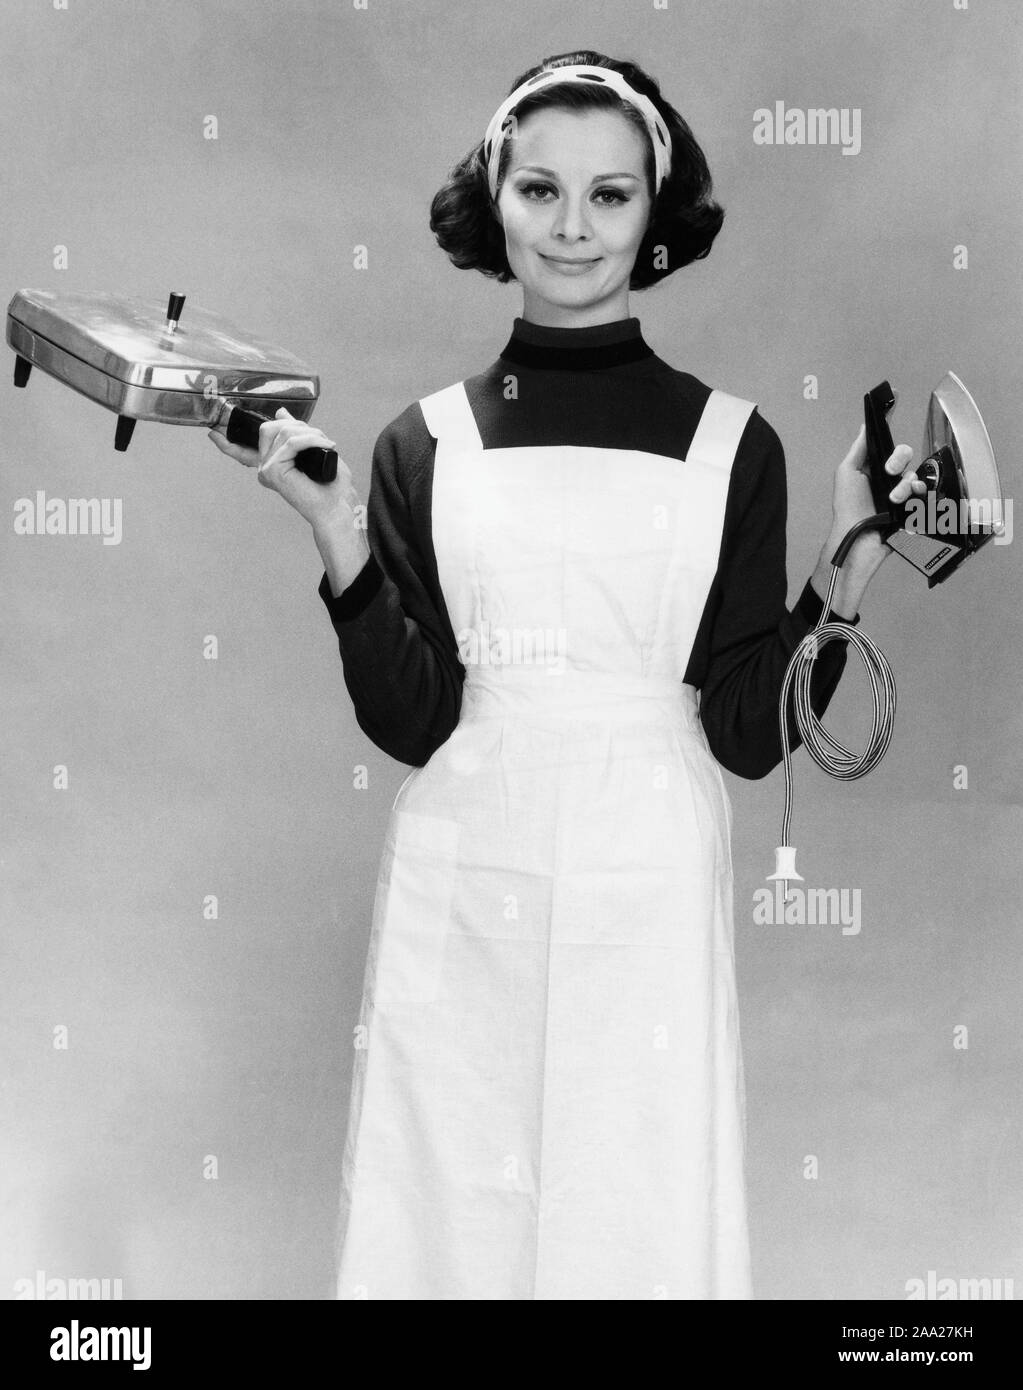 Back in the 1960s. A young woman is holding a flat iron and an electric whaffle iron made by Elektro Helios. Sweden 1963 Stock Photo